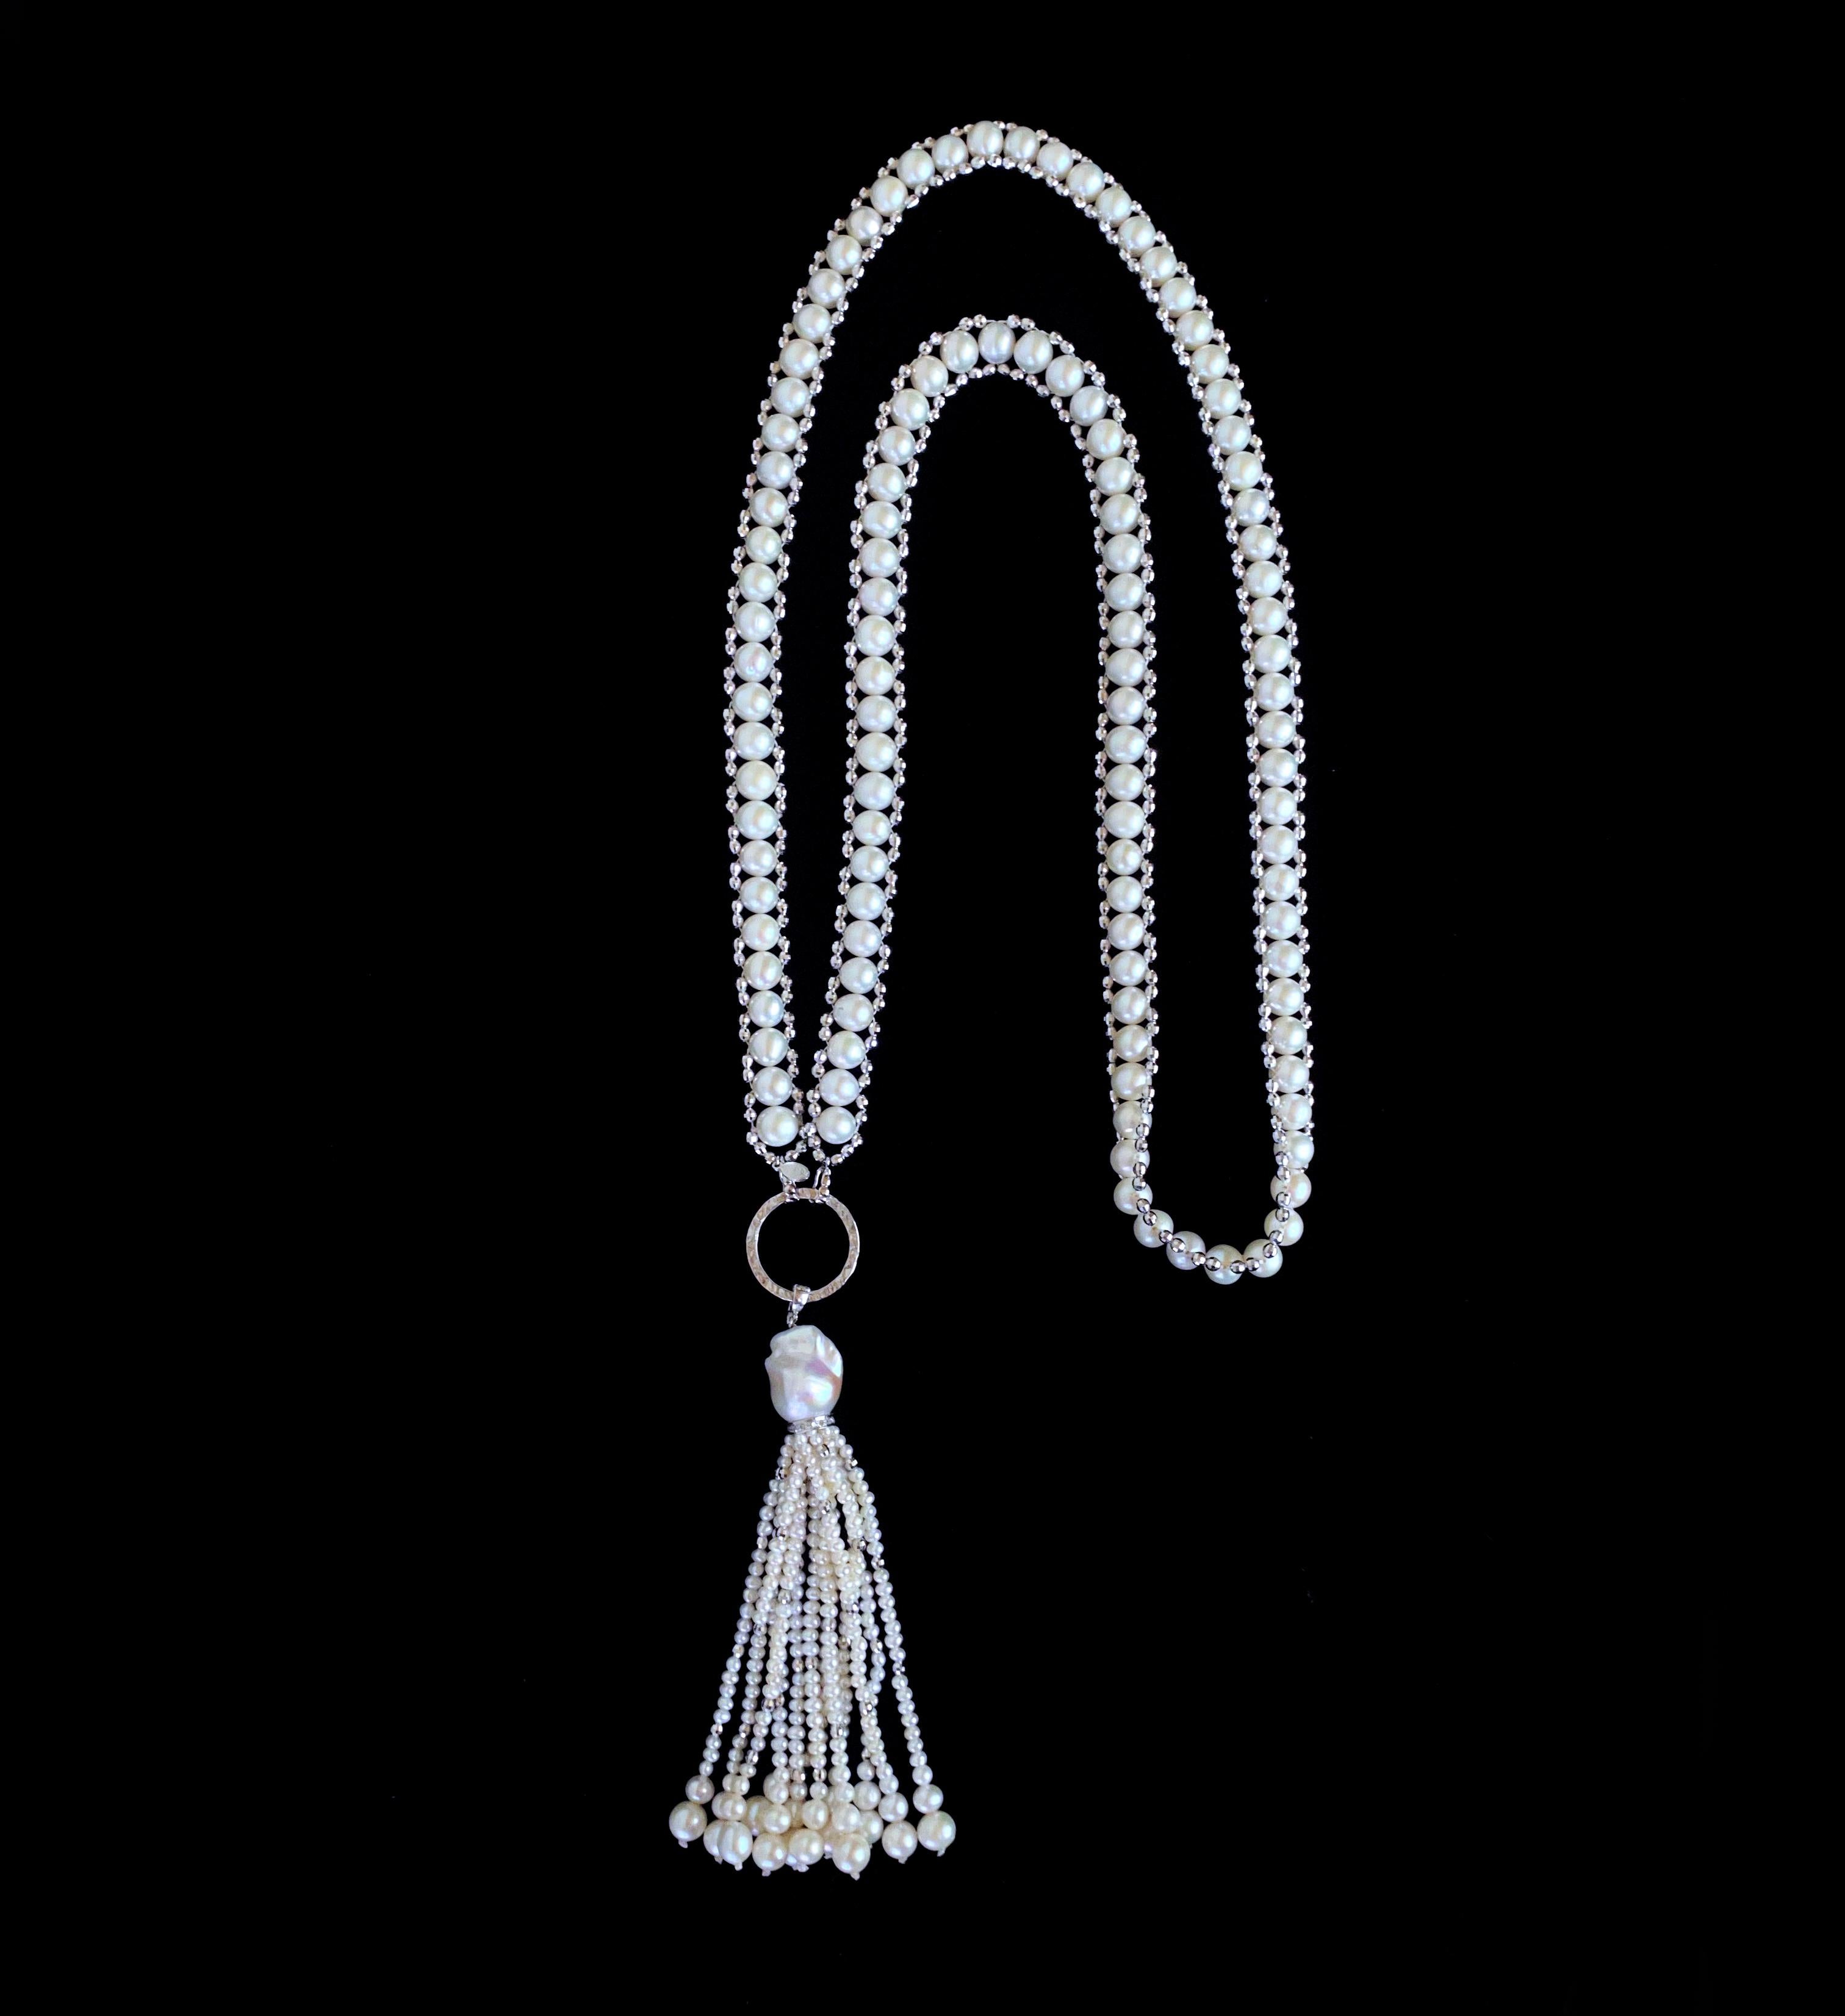 One of a kind piece by Marina J. The ultimate Shine Sautoir! This striking Sautoir is made using all cultured White Pearls adorned by high shine faceted Rhodium Plated Silver beads and detailings with a gorgeous removable Tassel. Woven into a lace